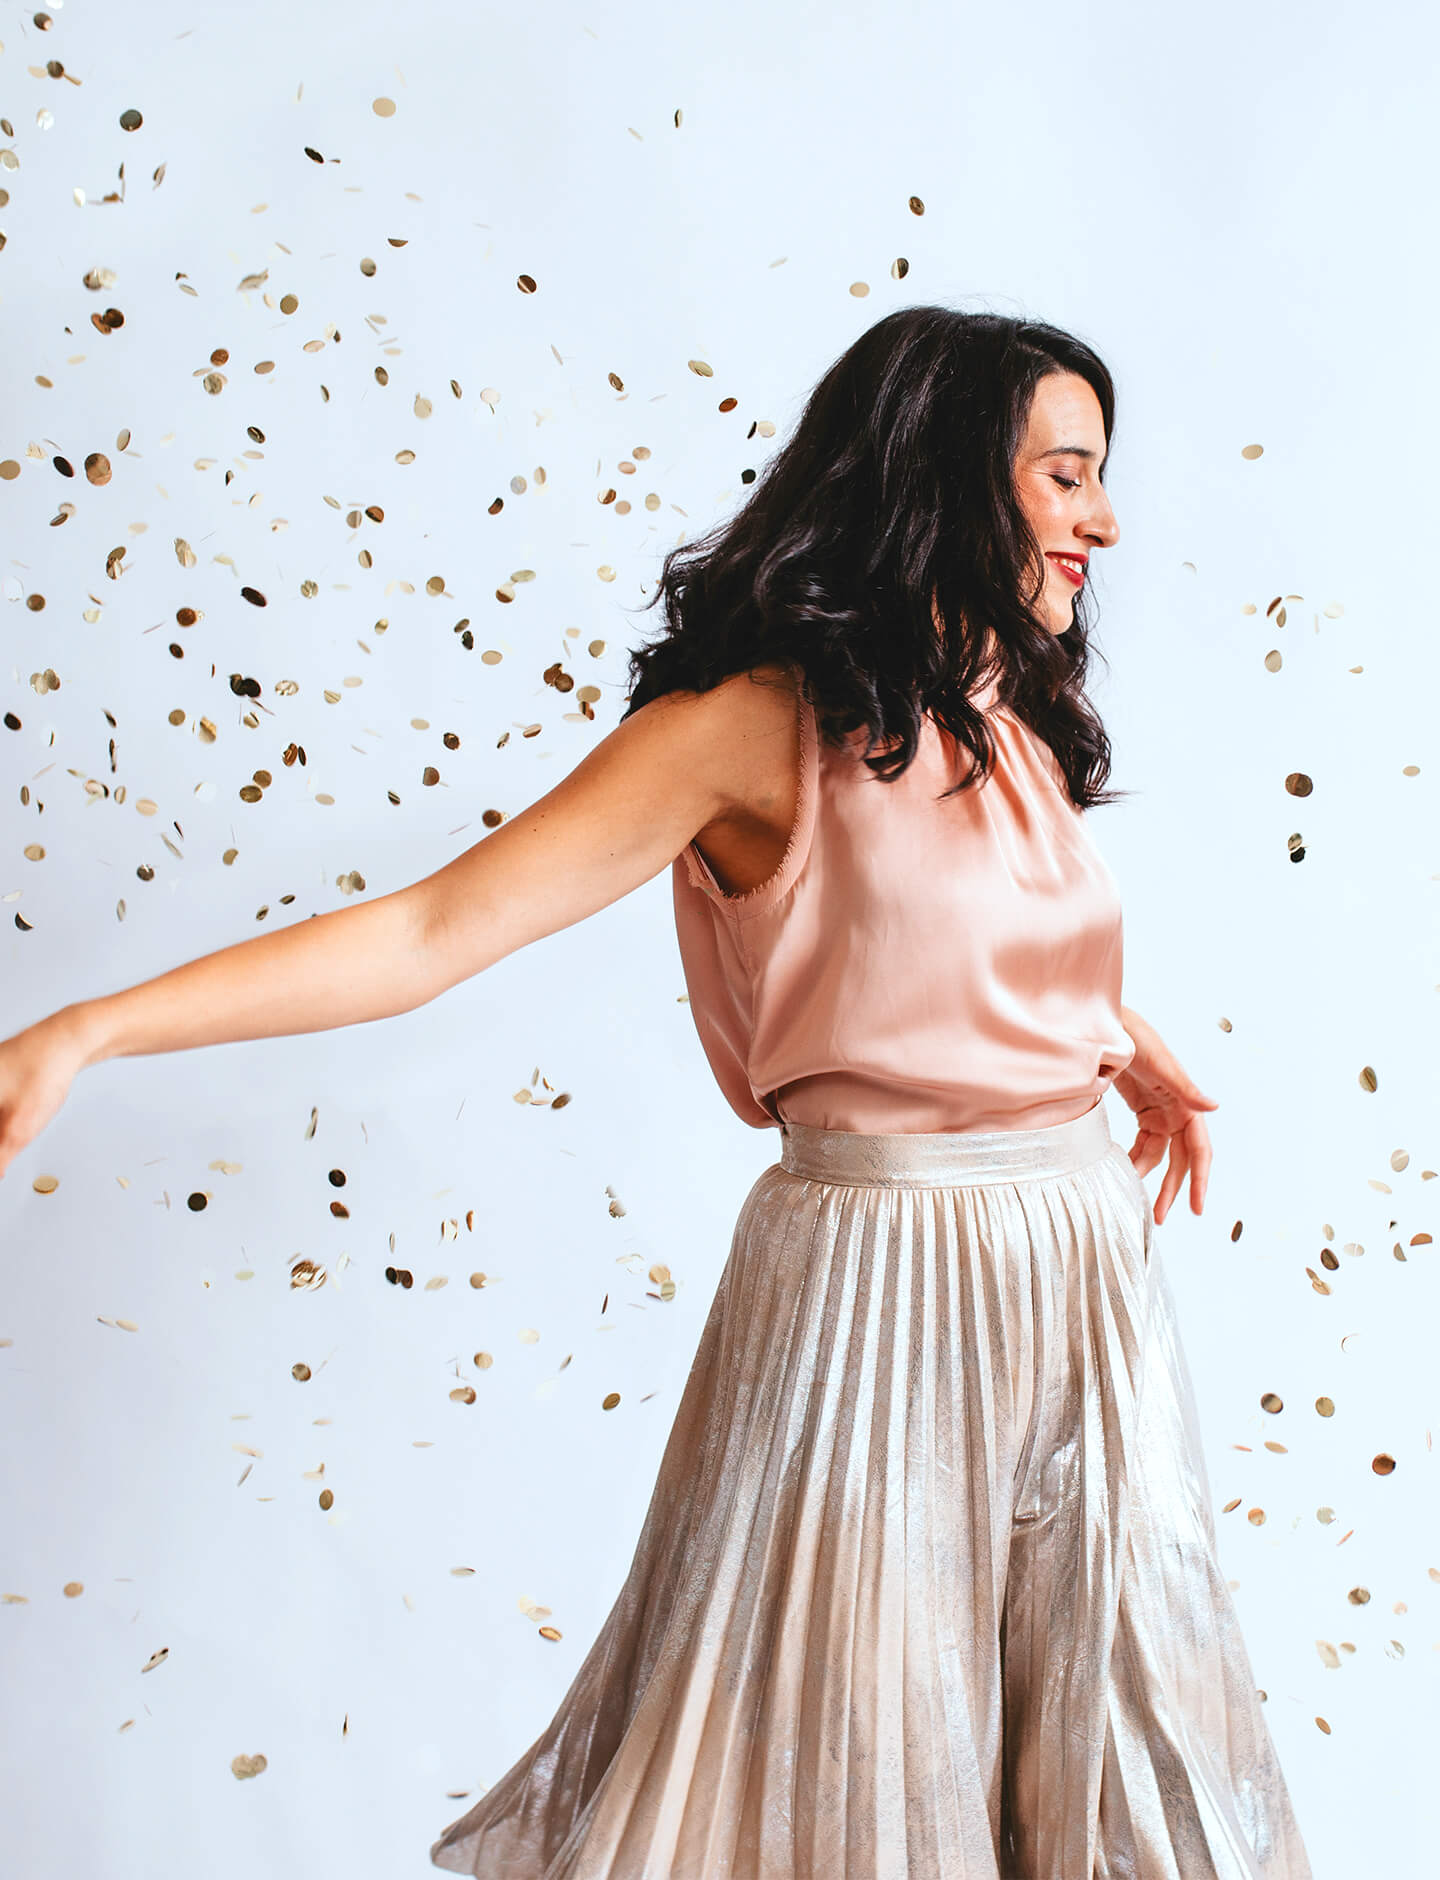 woman dancing in confetti floating in the air